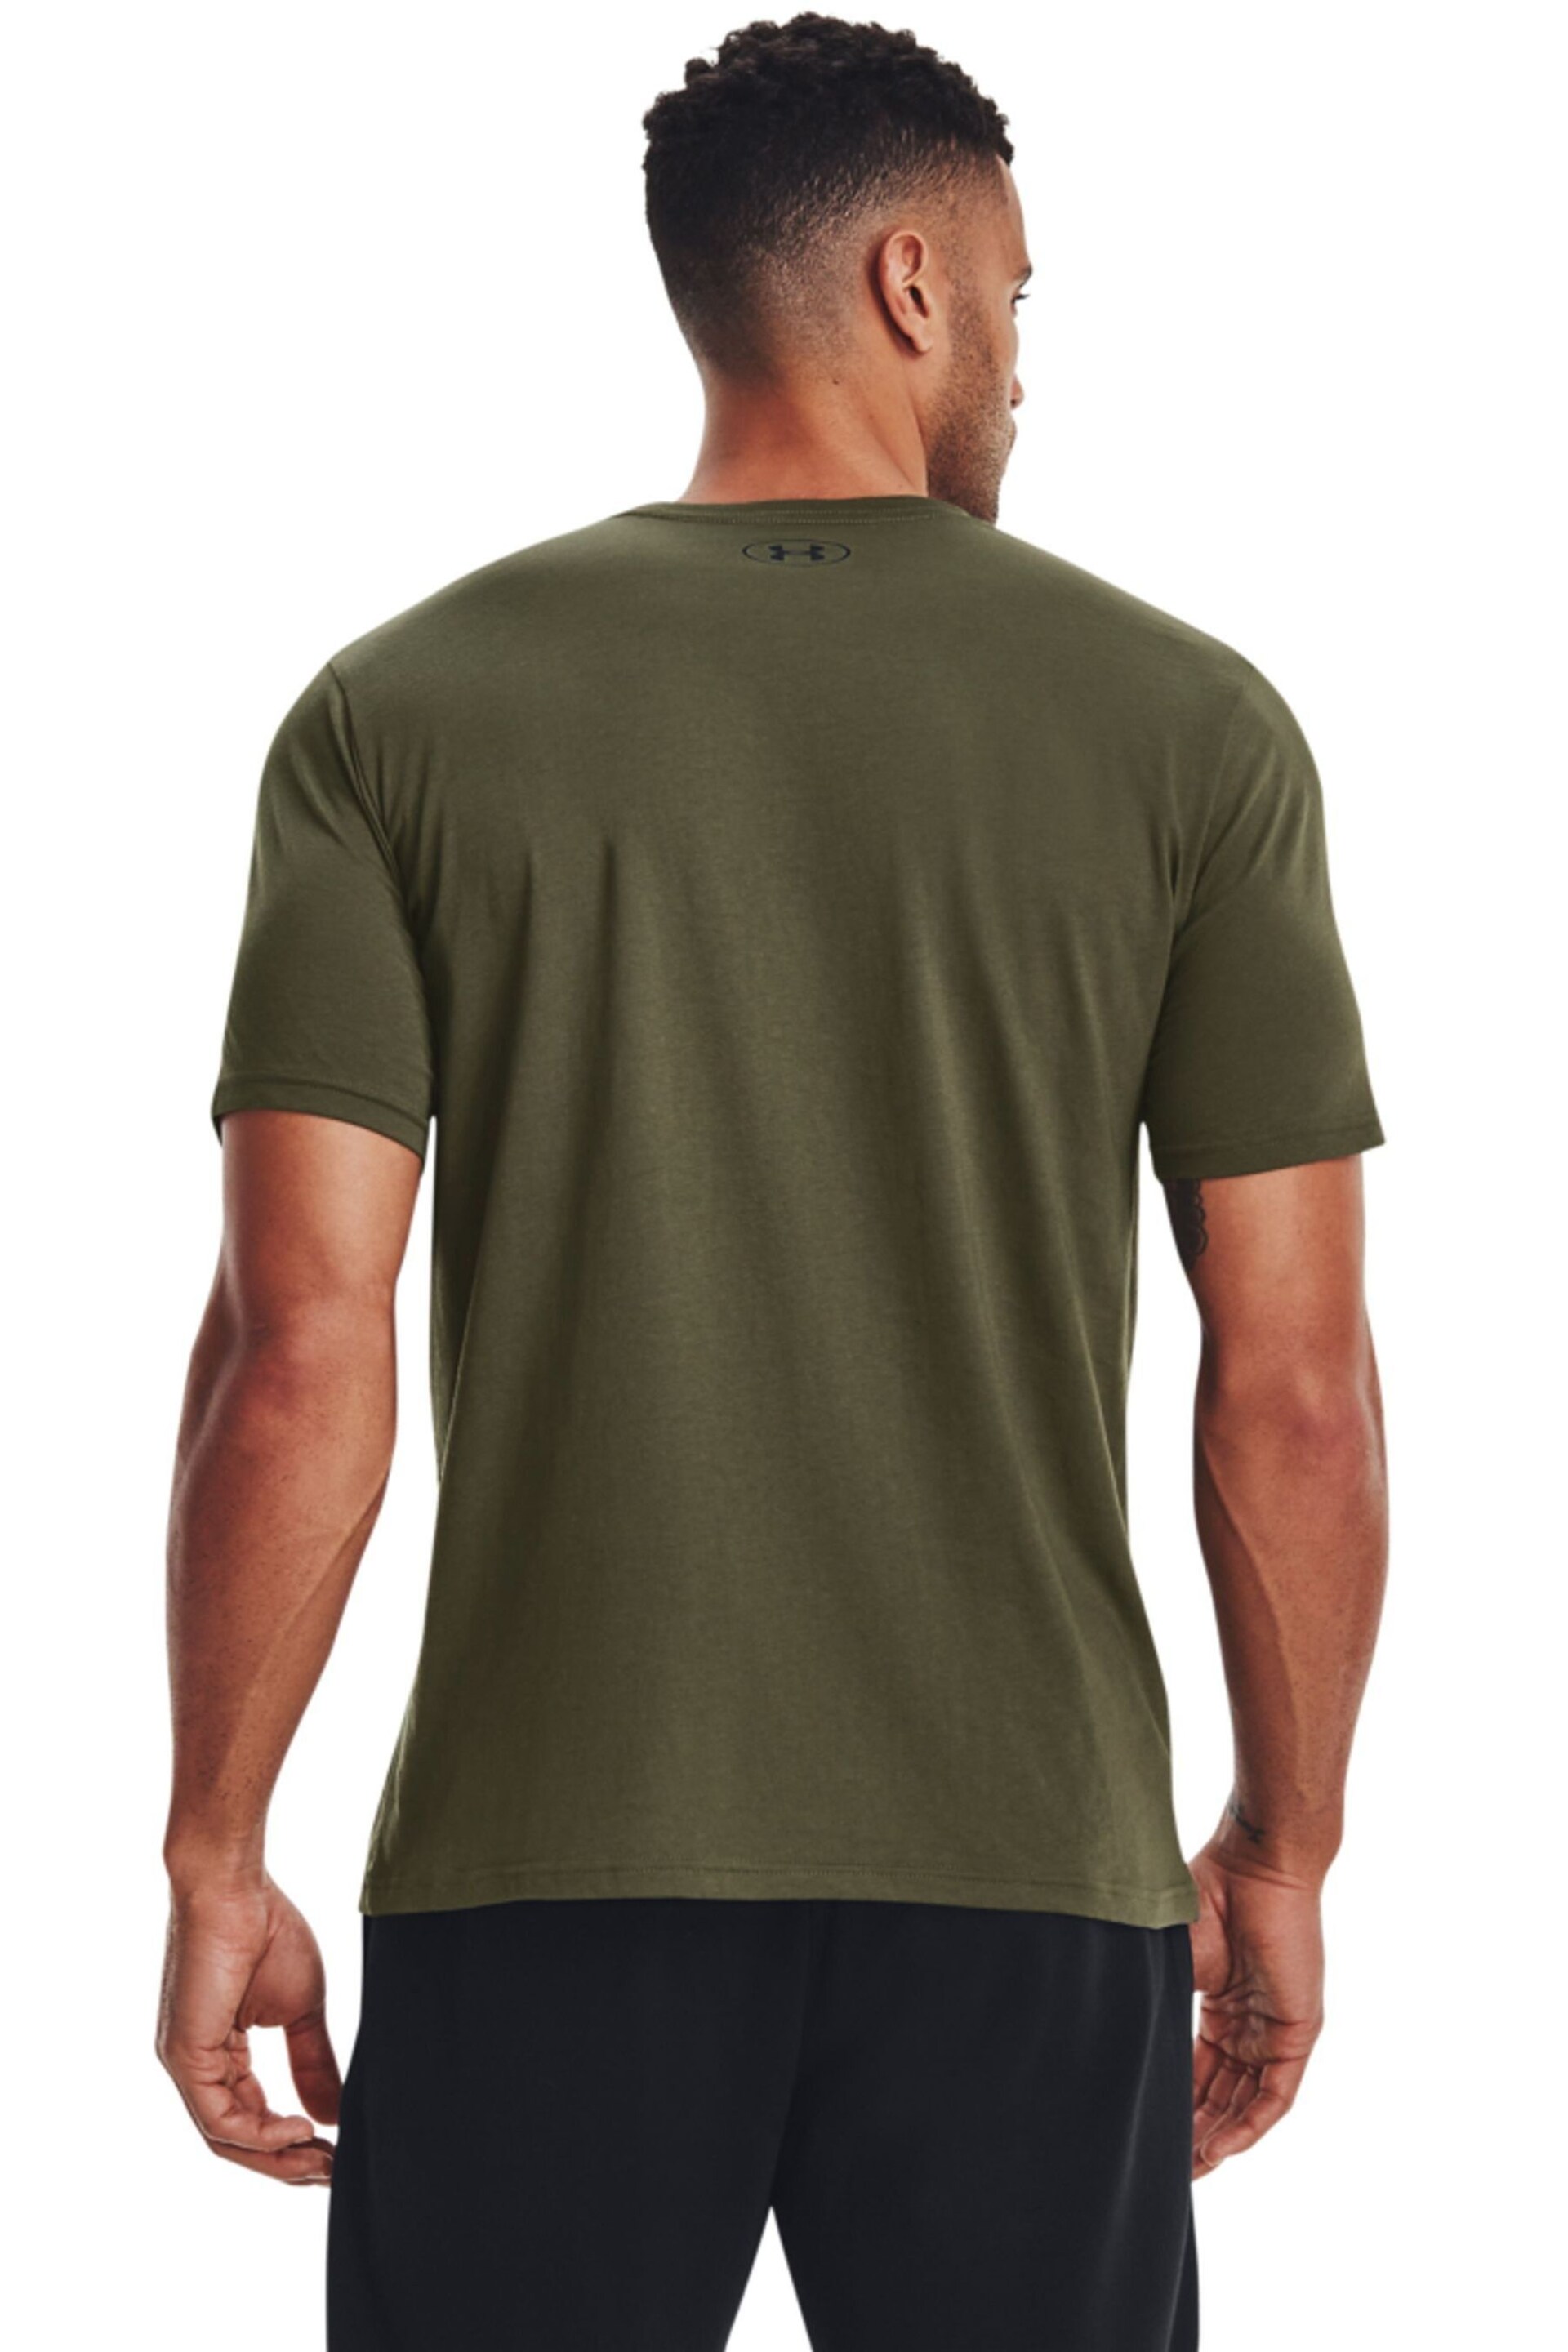 Under Armour Green Under Armour Left Chest Short Sleeve T-Shirt - Image 2 of 6